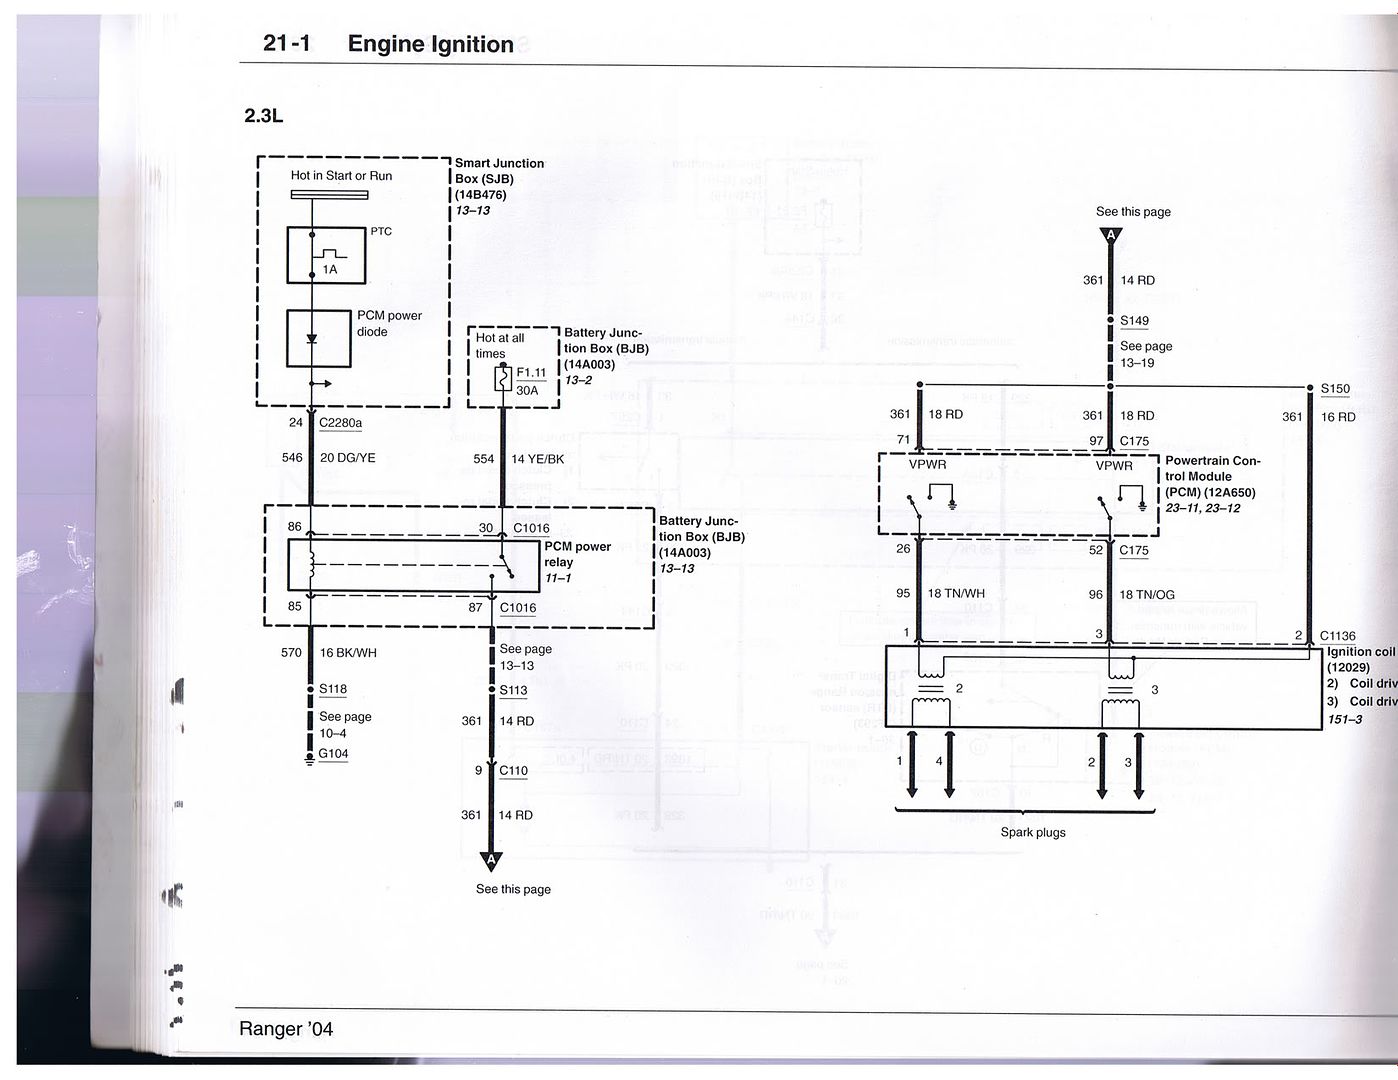 2004-2006 2.3 Wiring Diagram (HUGE pics) - Ranger-Forums - The Ultimate